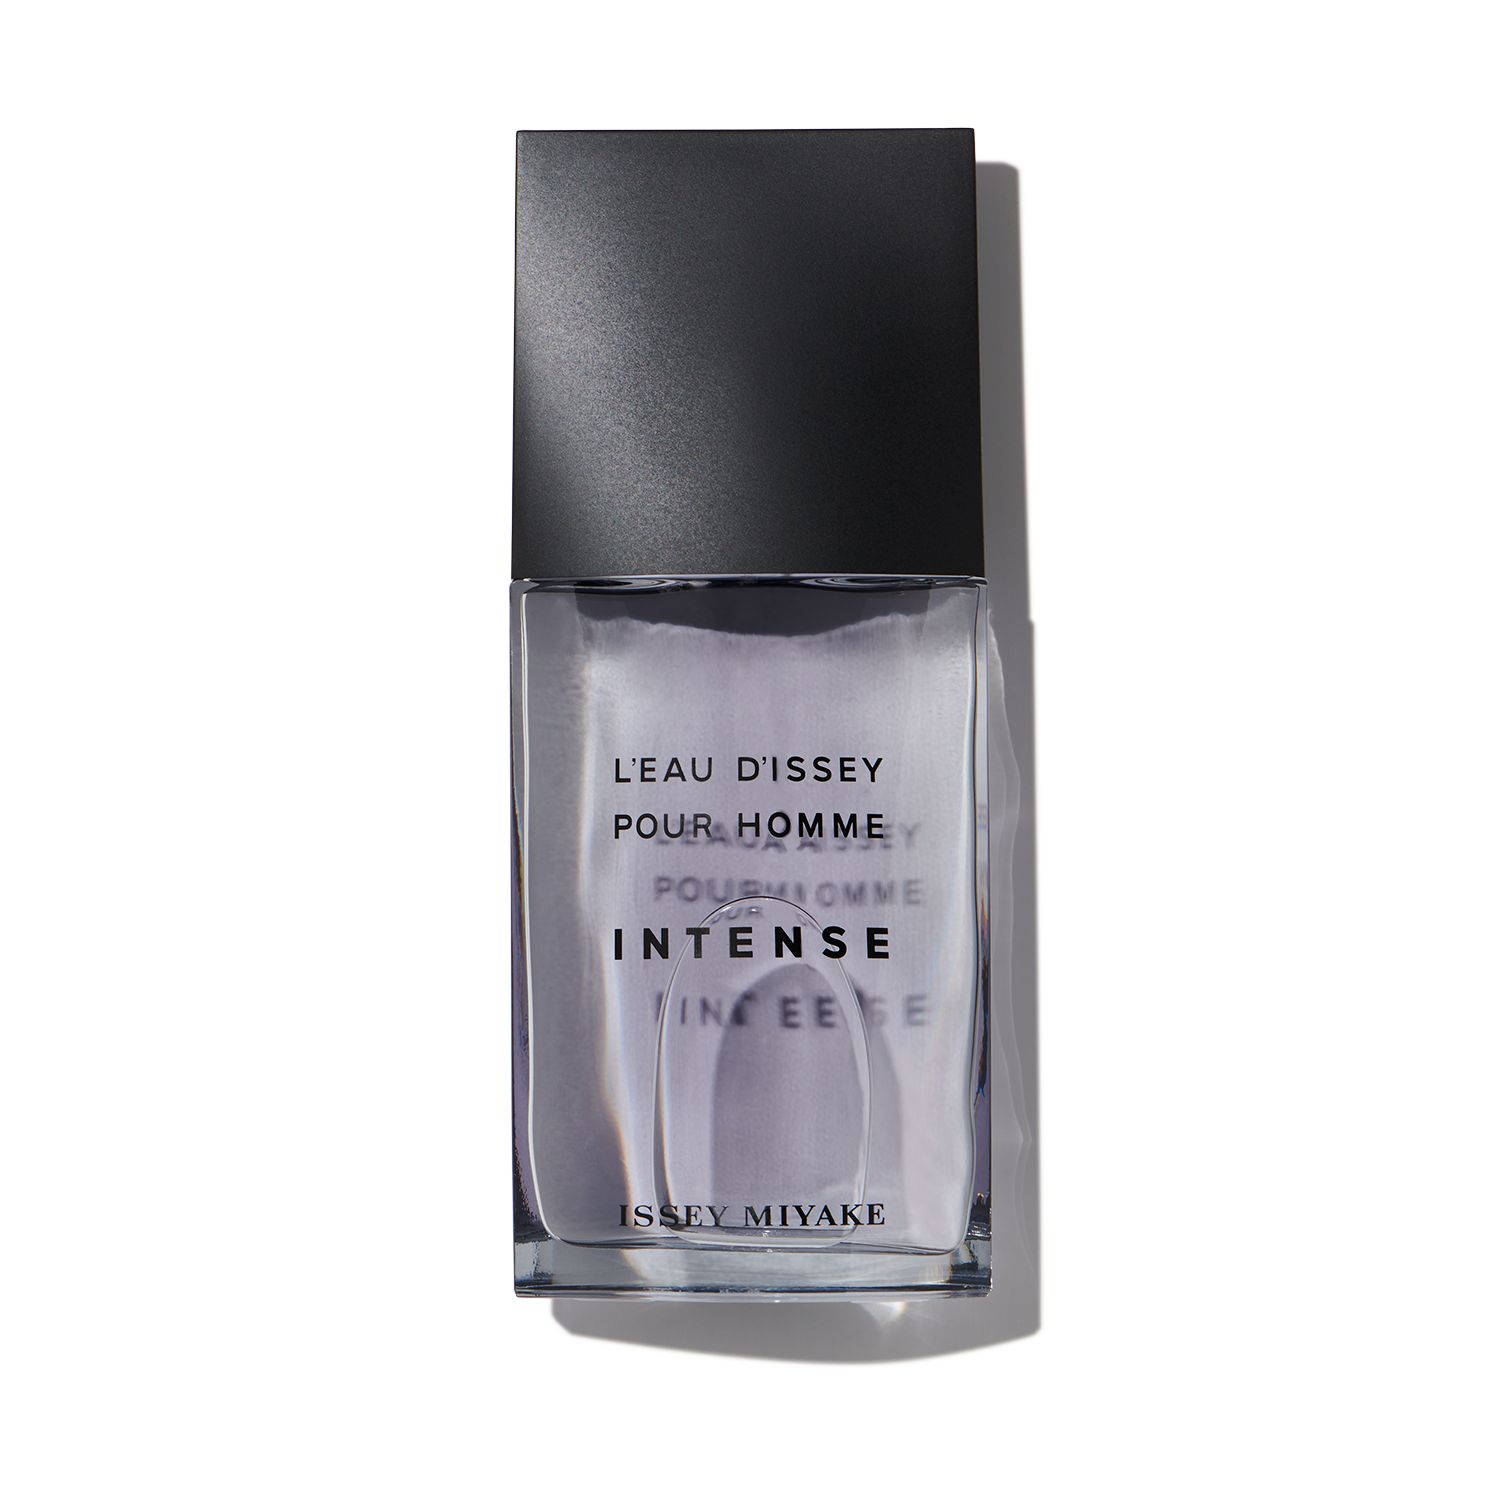 Mainstream gebed laat staan Issey Miyake L'Eau d'Issey Pour Homme Intense for $16.95 per month |  Scentbird